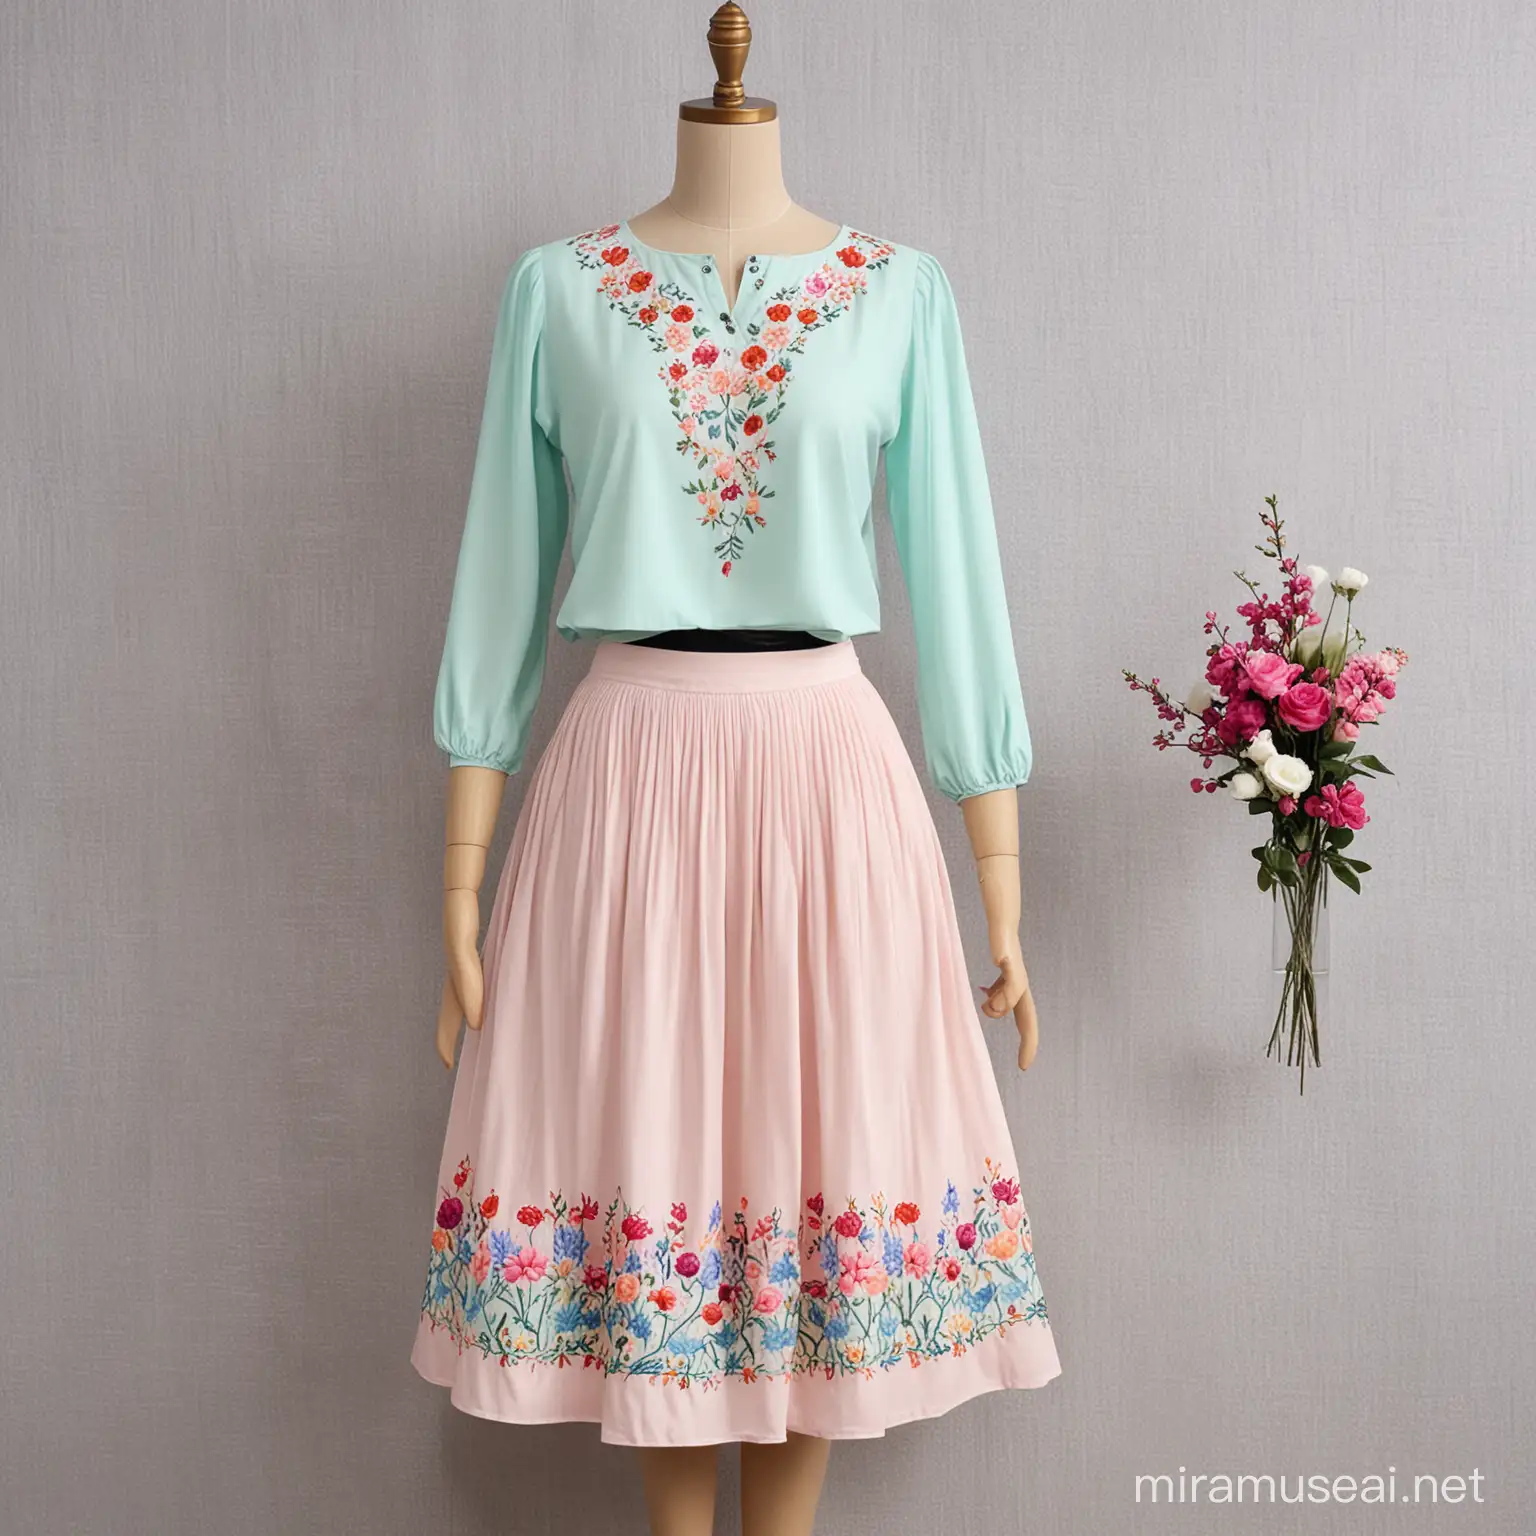 Pastel colour skirt and top for women with embroidery design